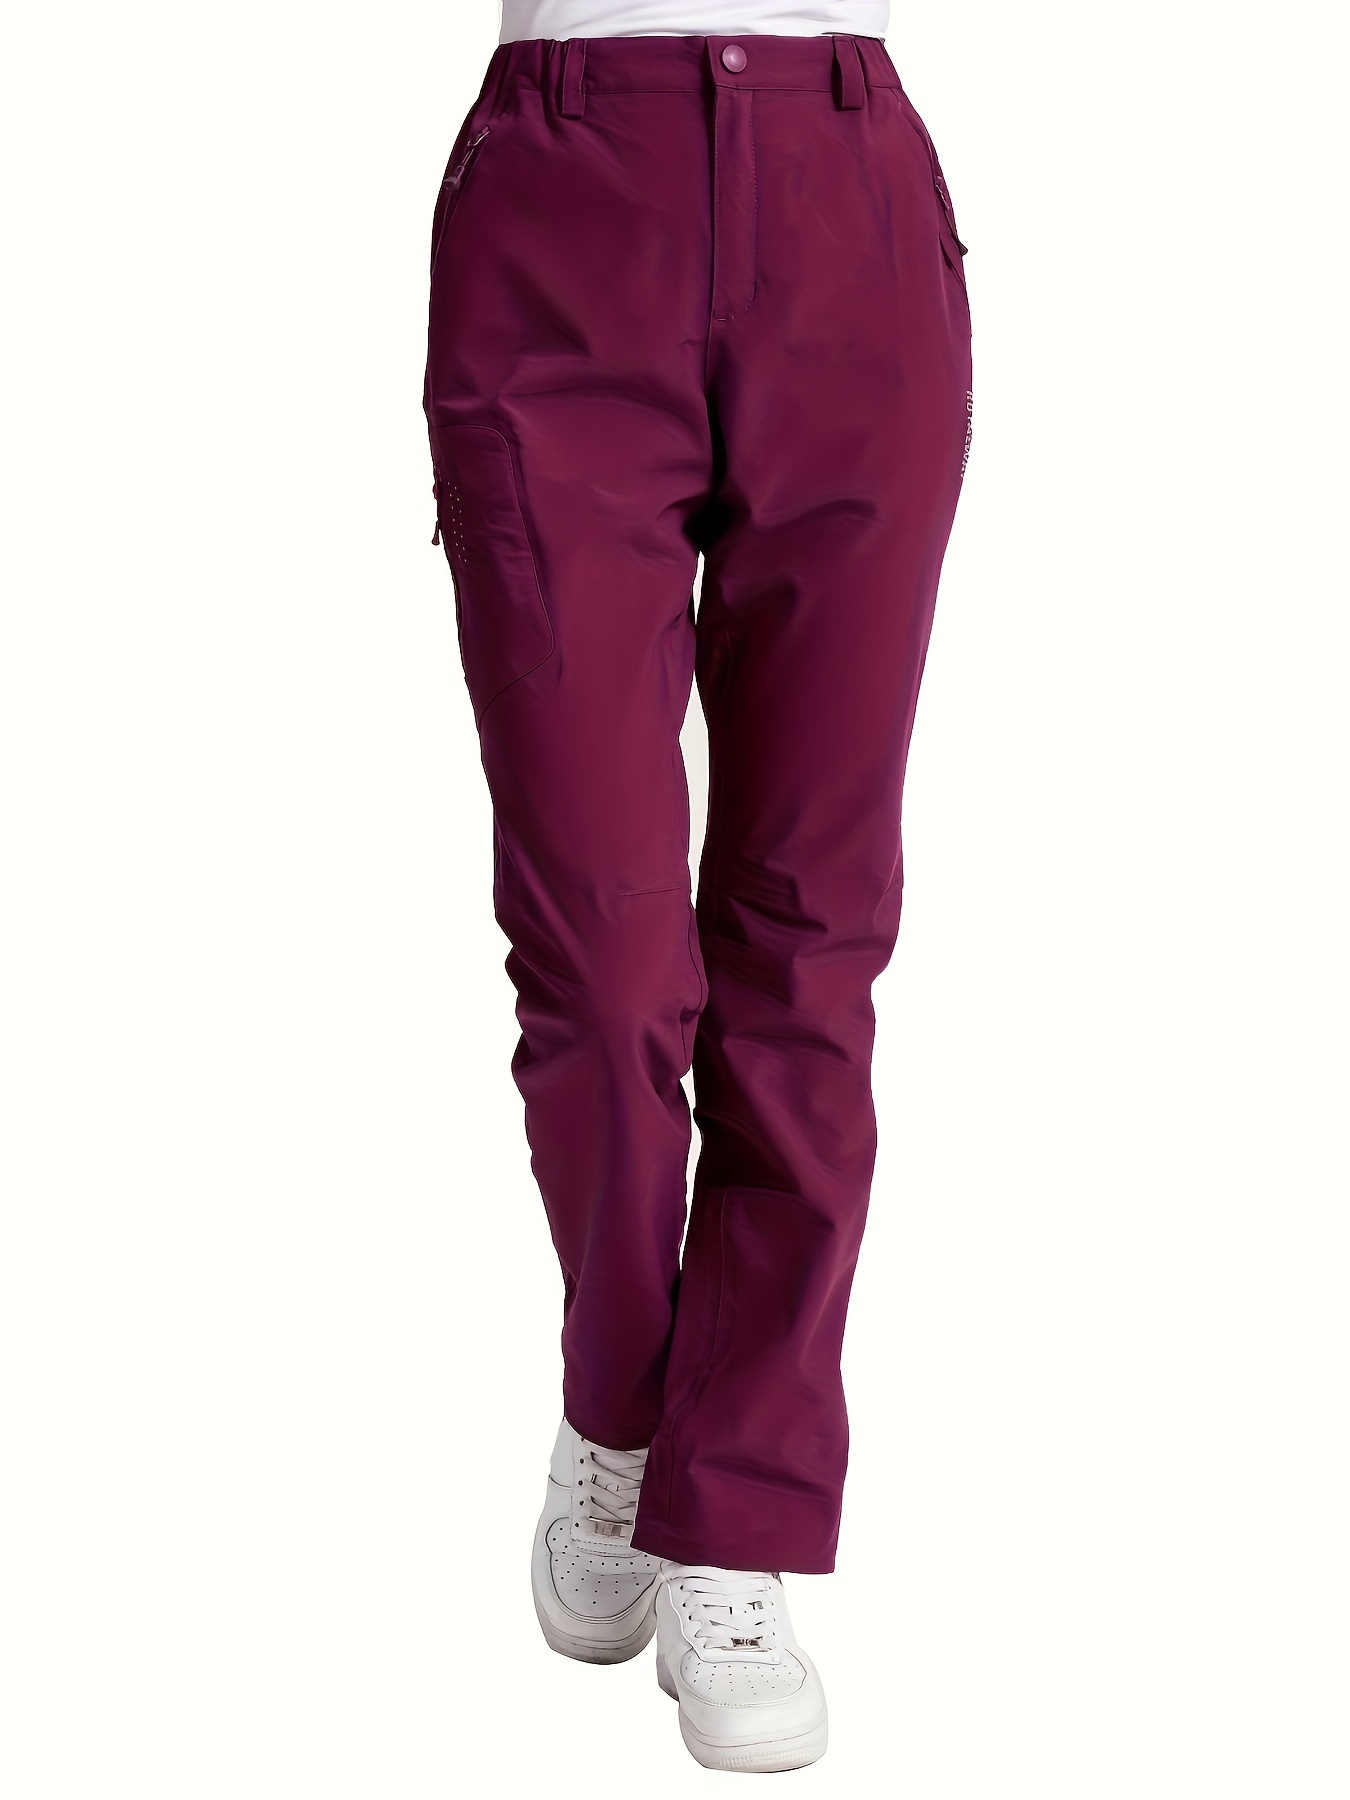 * Waterproof Fleece-Lined Pants for Outdoor Activities - Ideal for Hiking,  Climbing, Motorcycle Riding, and Skiing